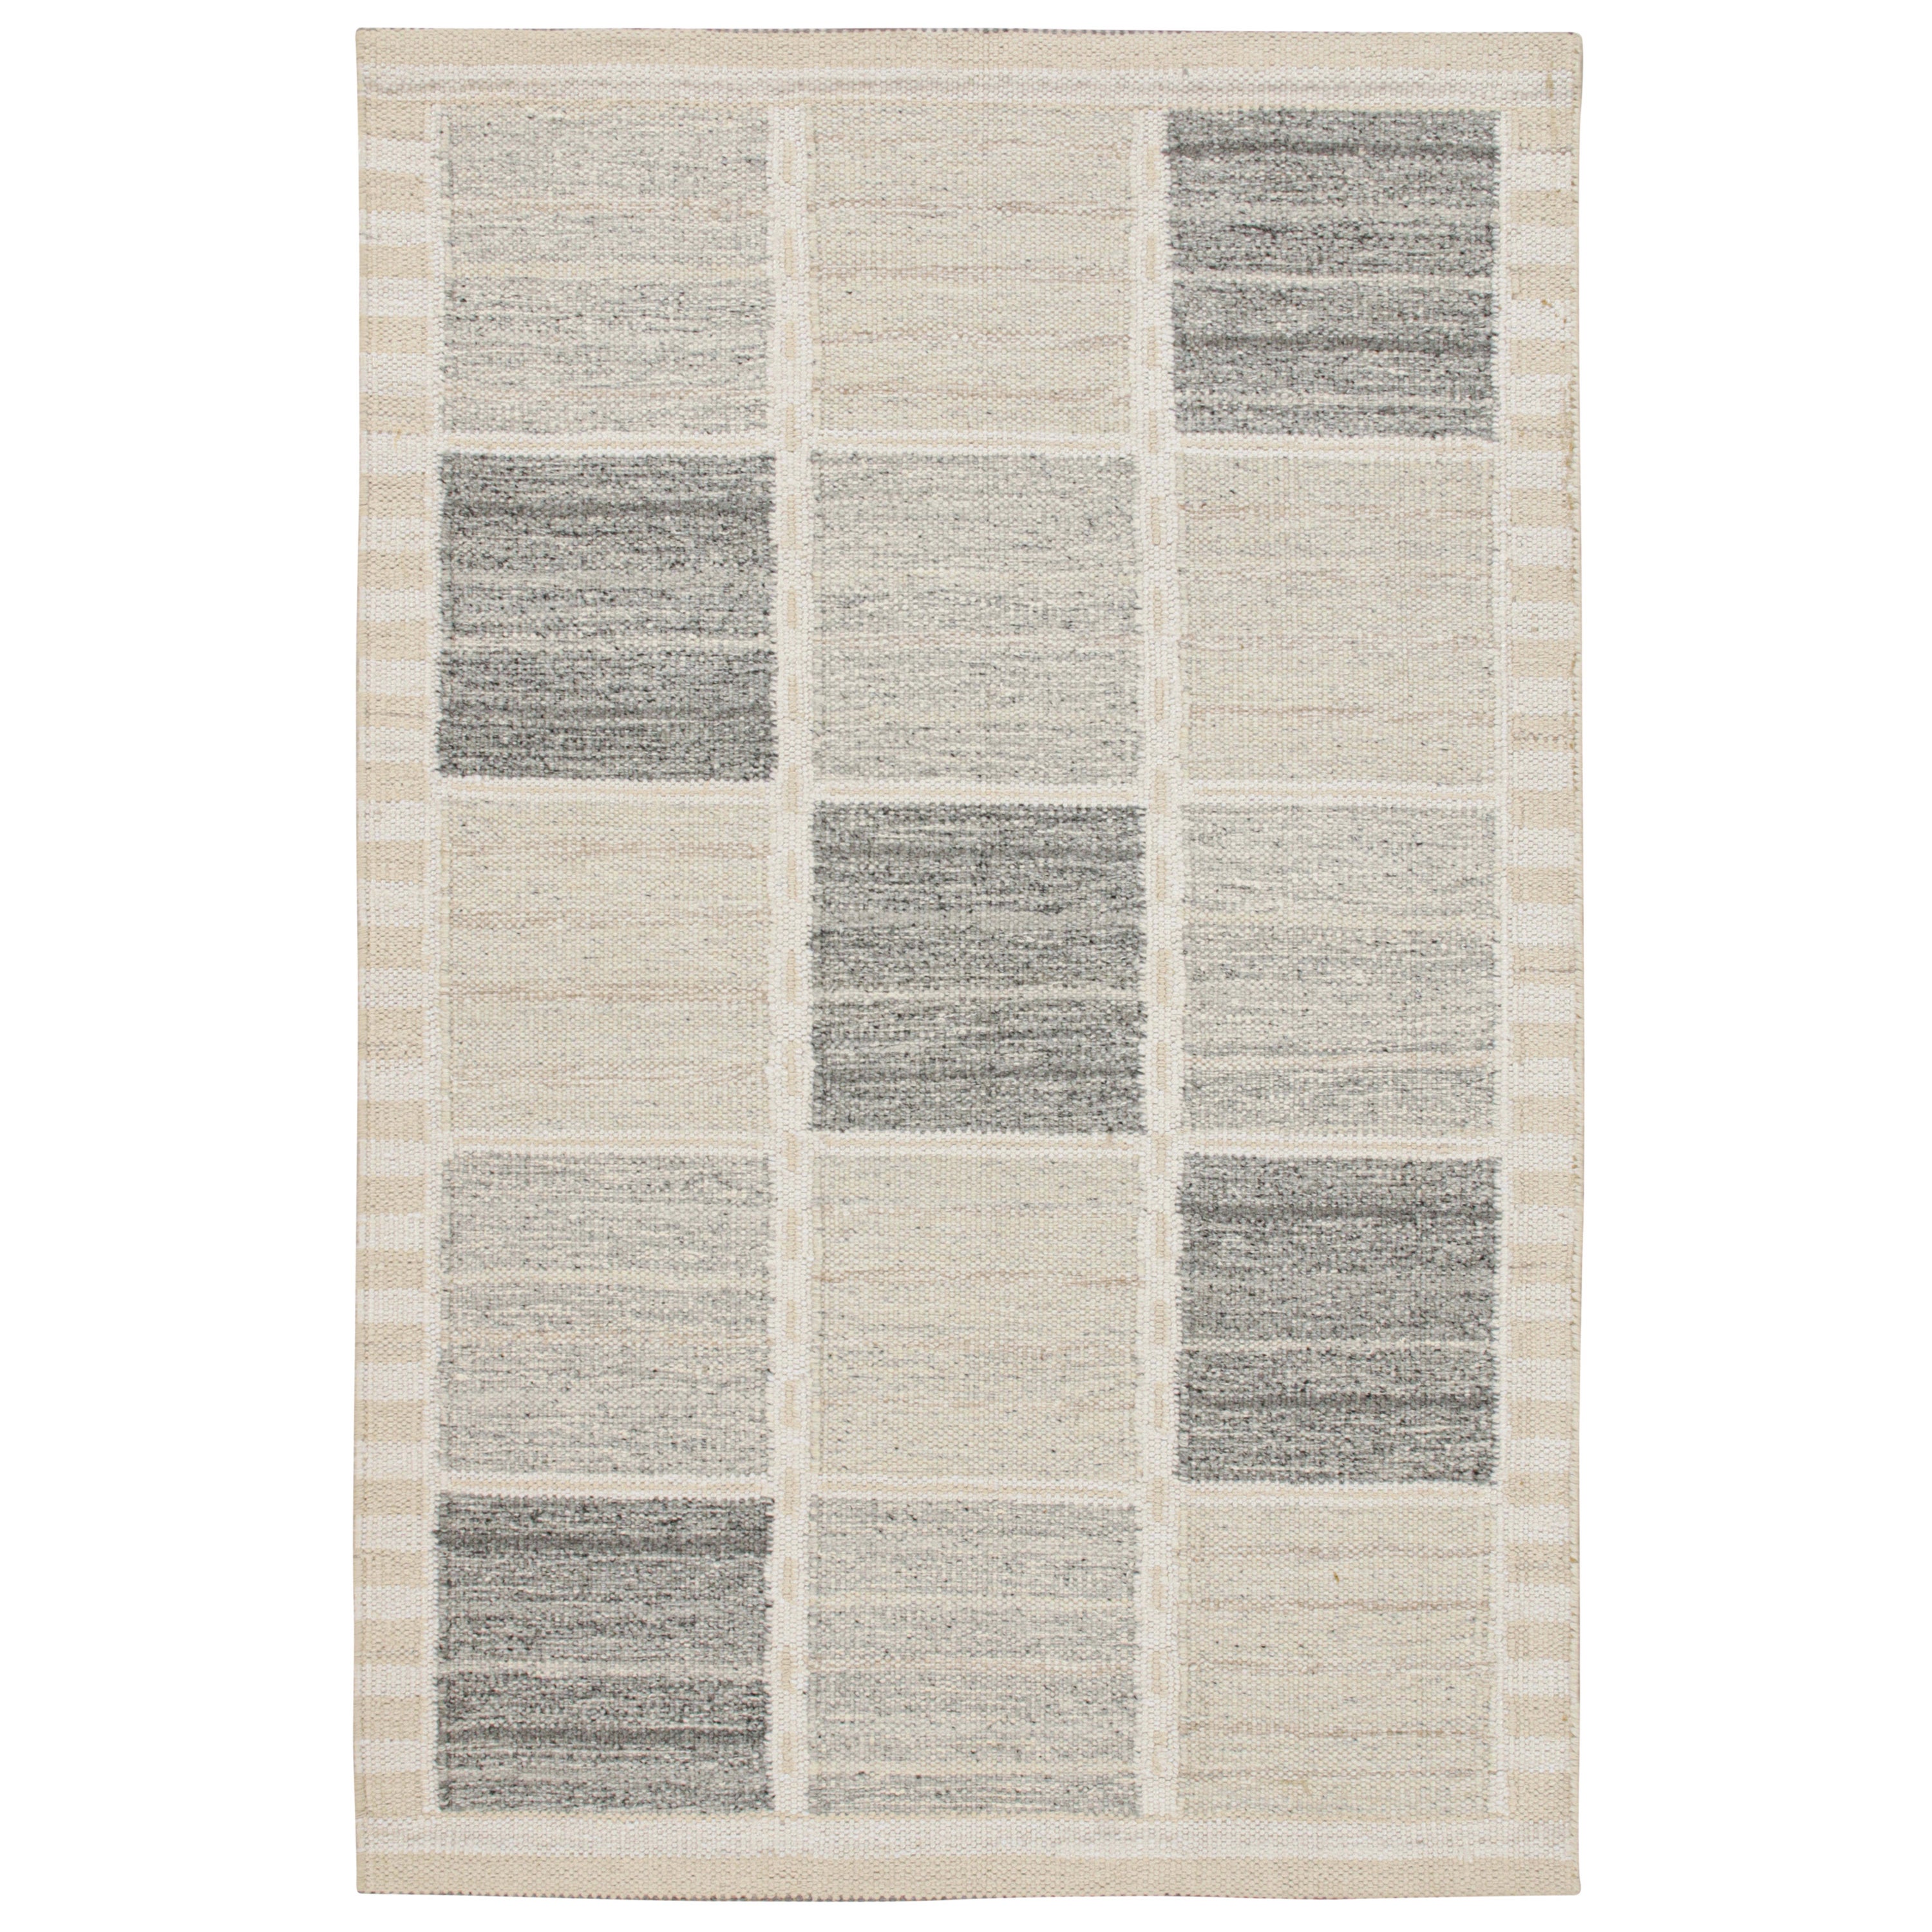 Rug & Kilim’s Scandinavian Style Kilim in Off-White and Grey Geometric Patterns For Sale